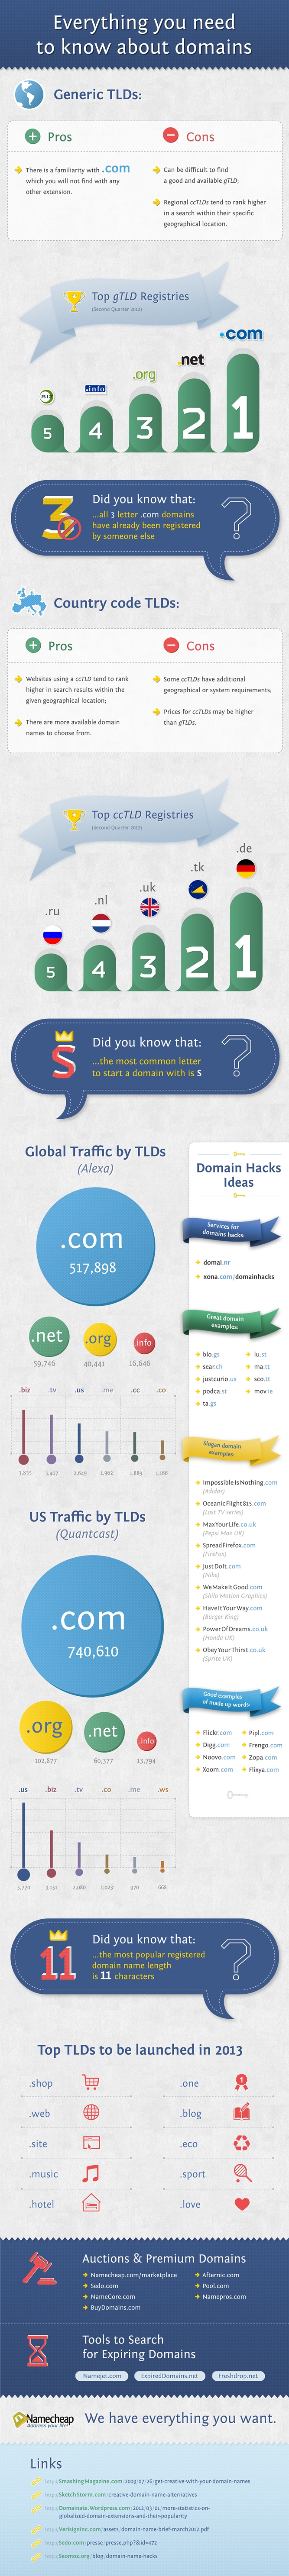 Everything You Need To Know About Domains